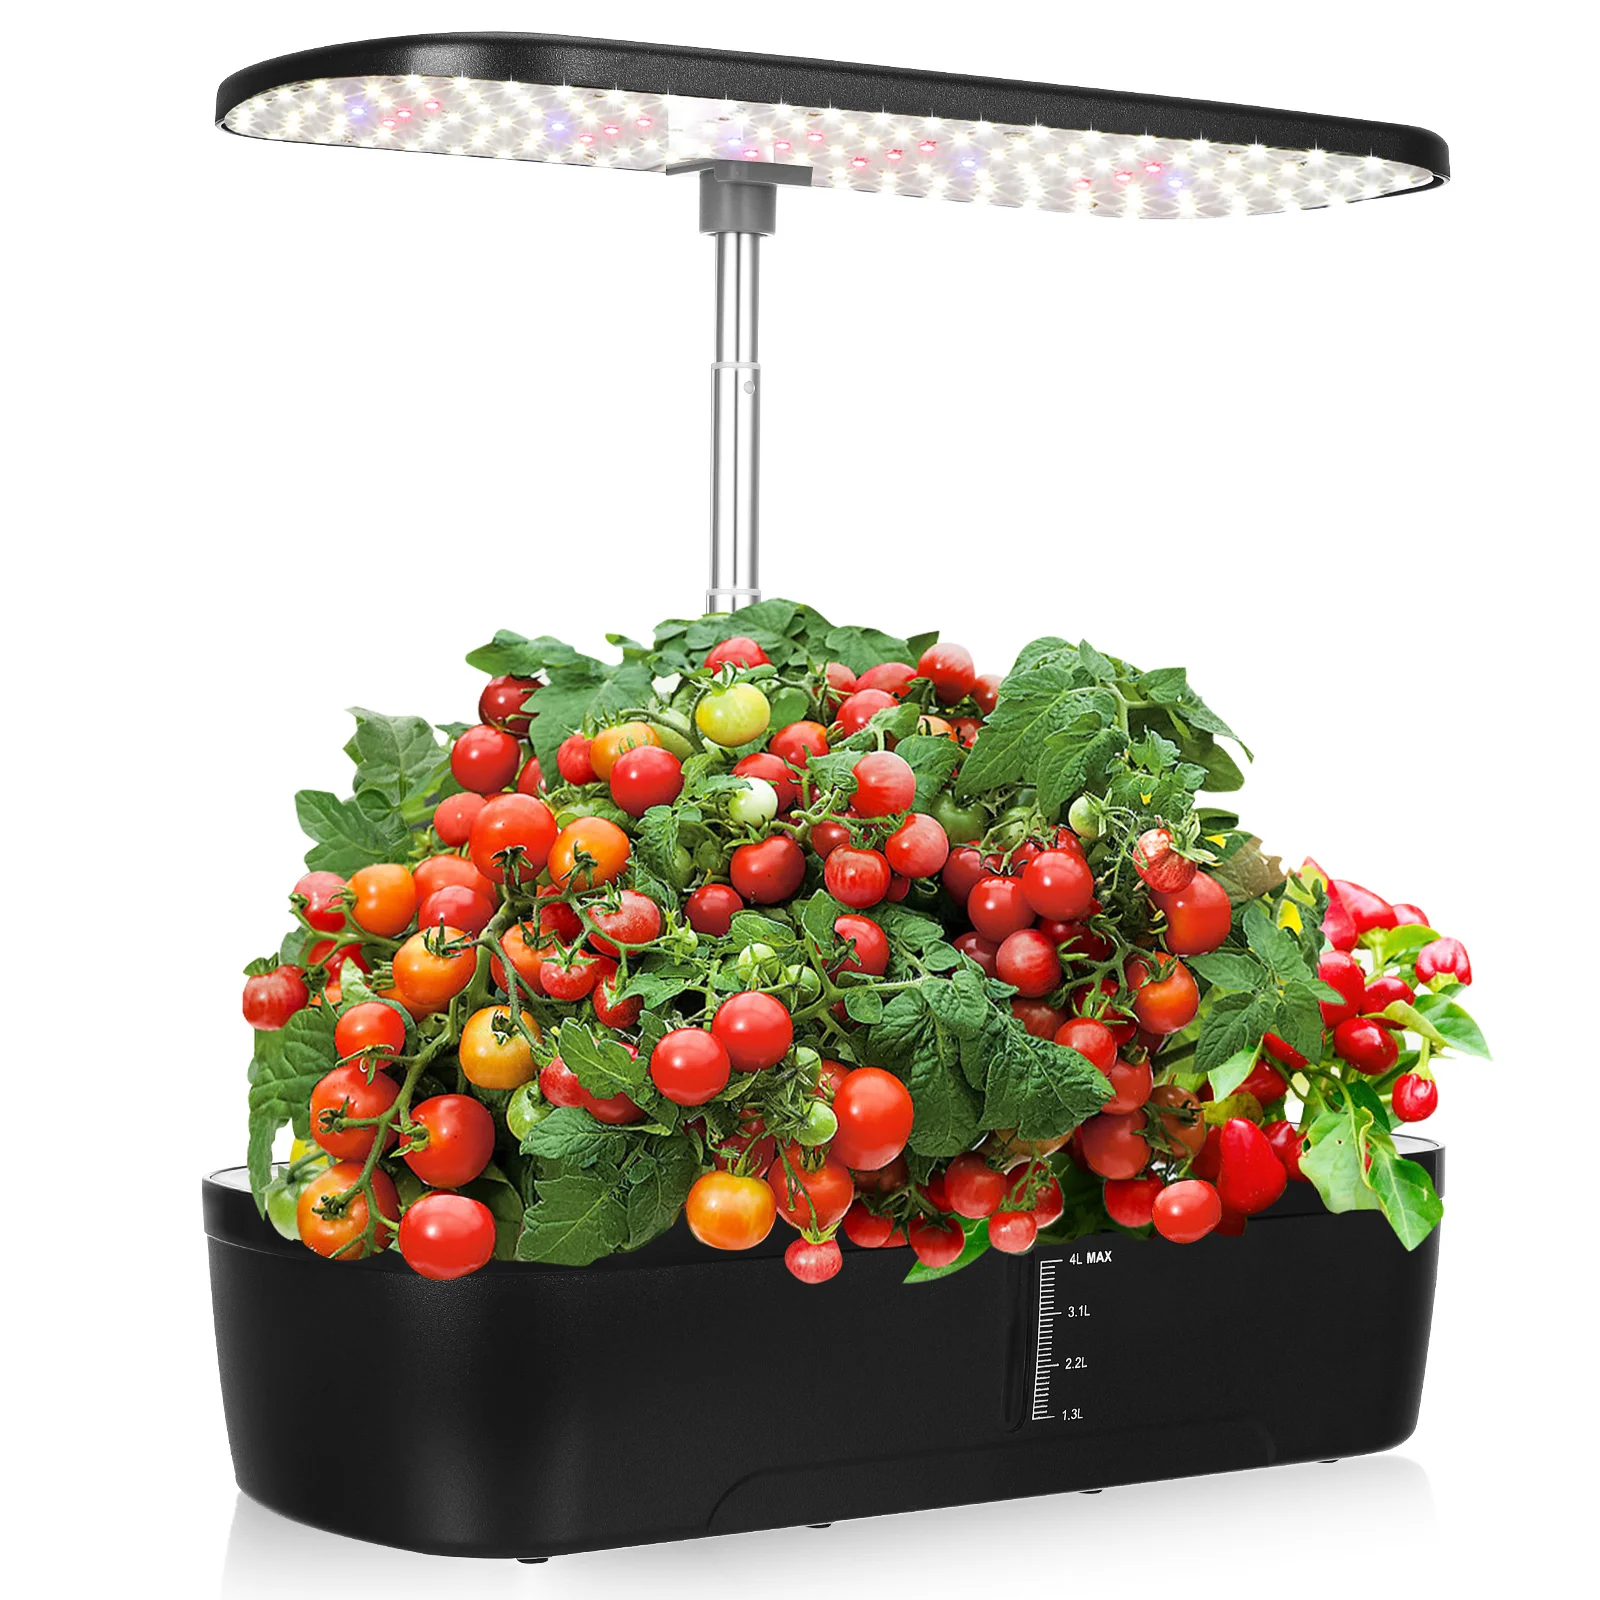 

Pods Hydroponics Growing System Smart Vegetable Planting Machine LED Grow Light with US Plug For Home Garden